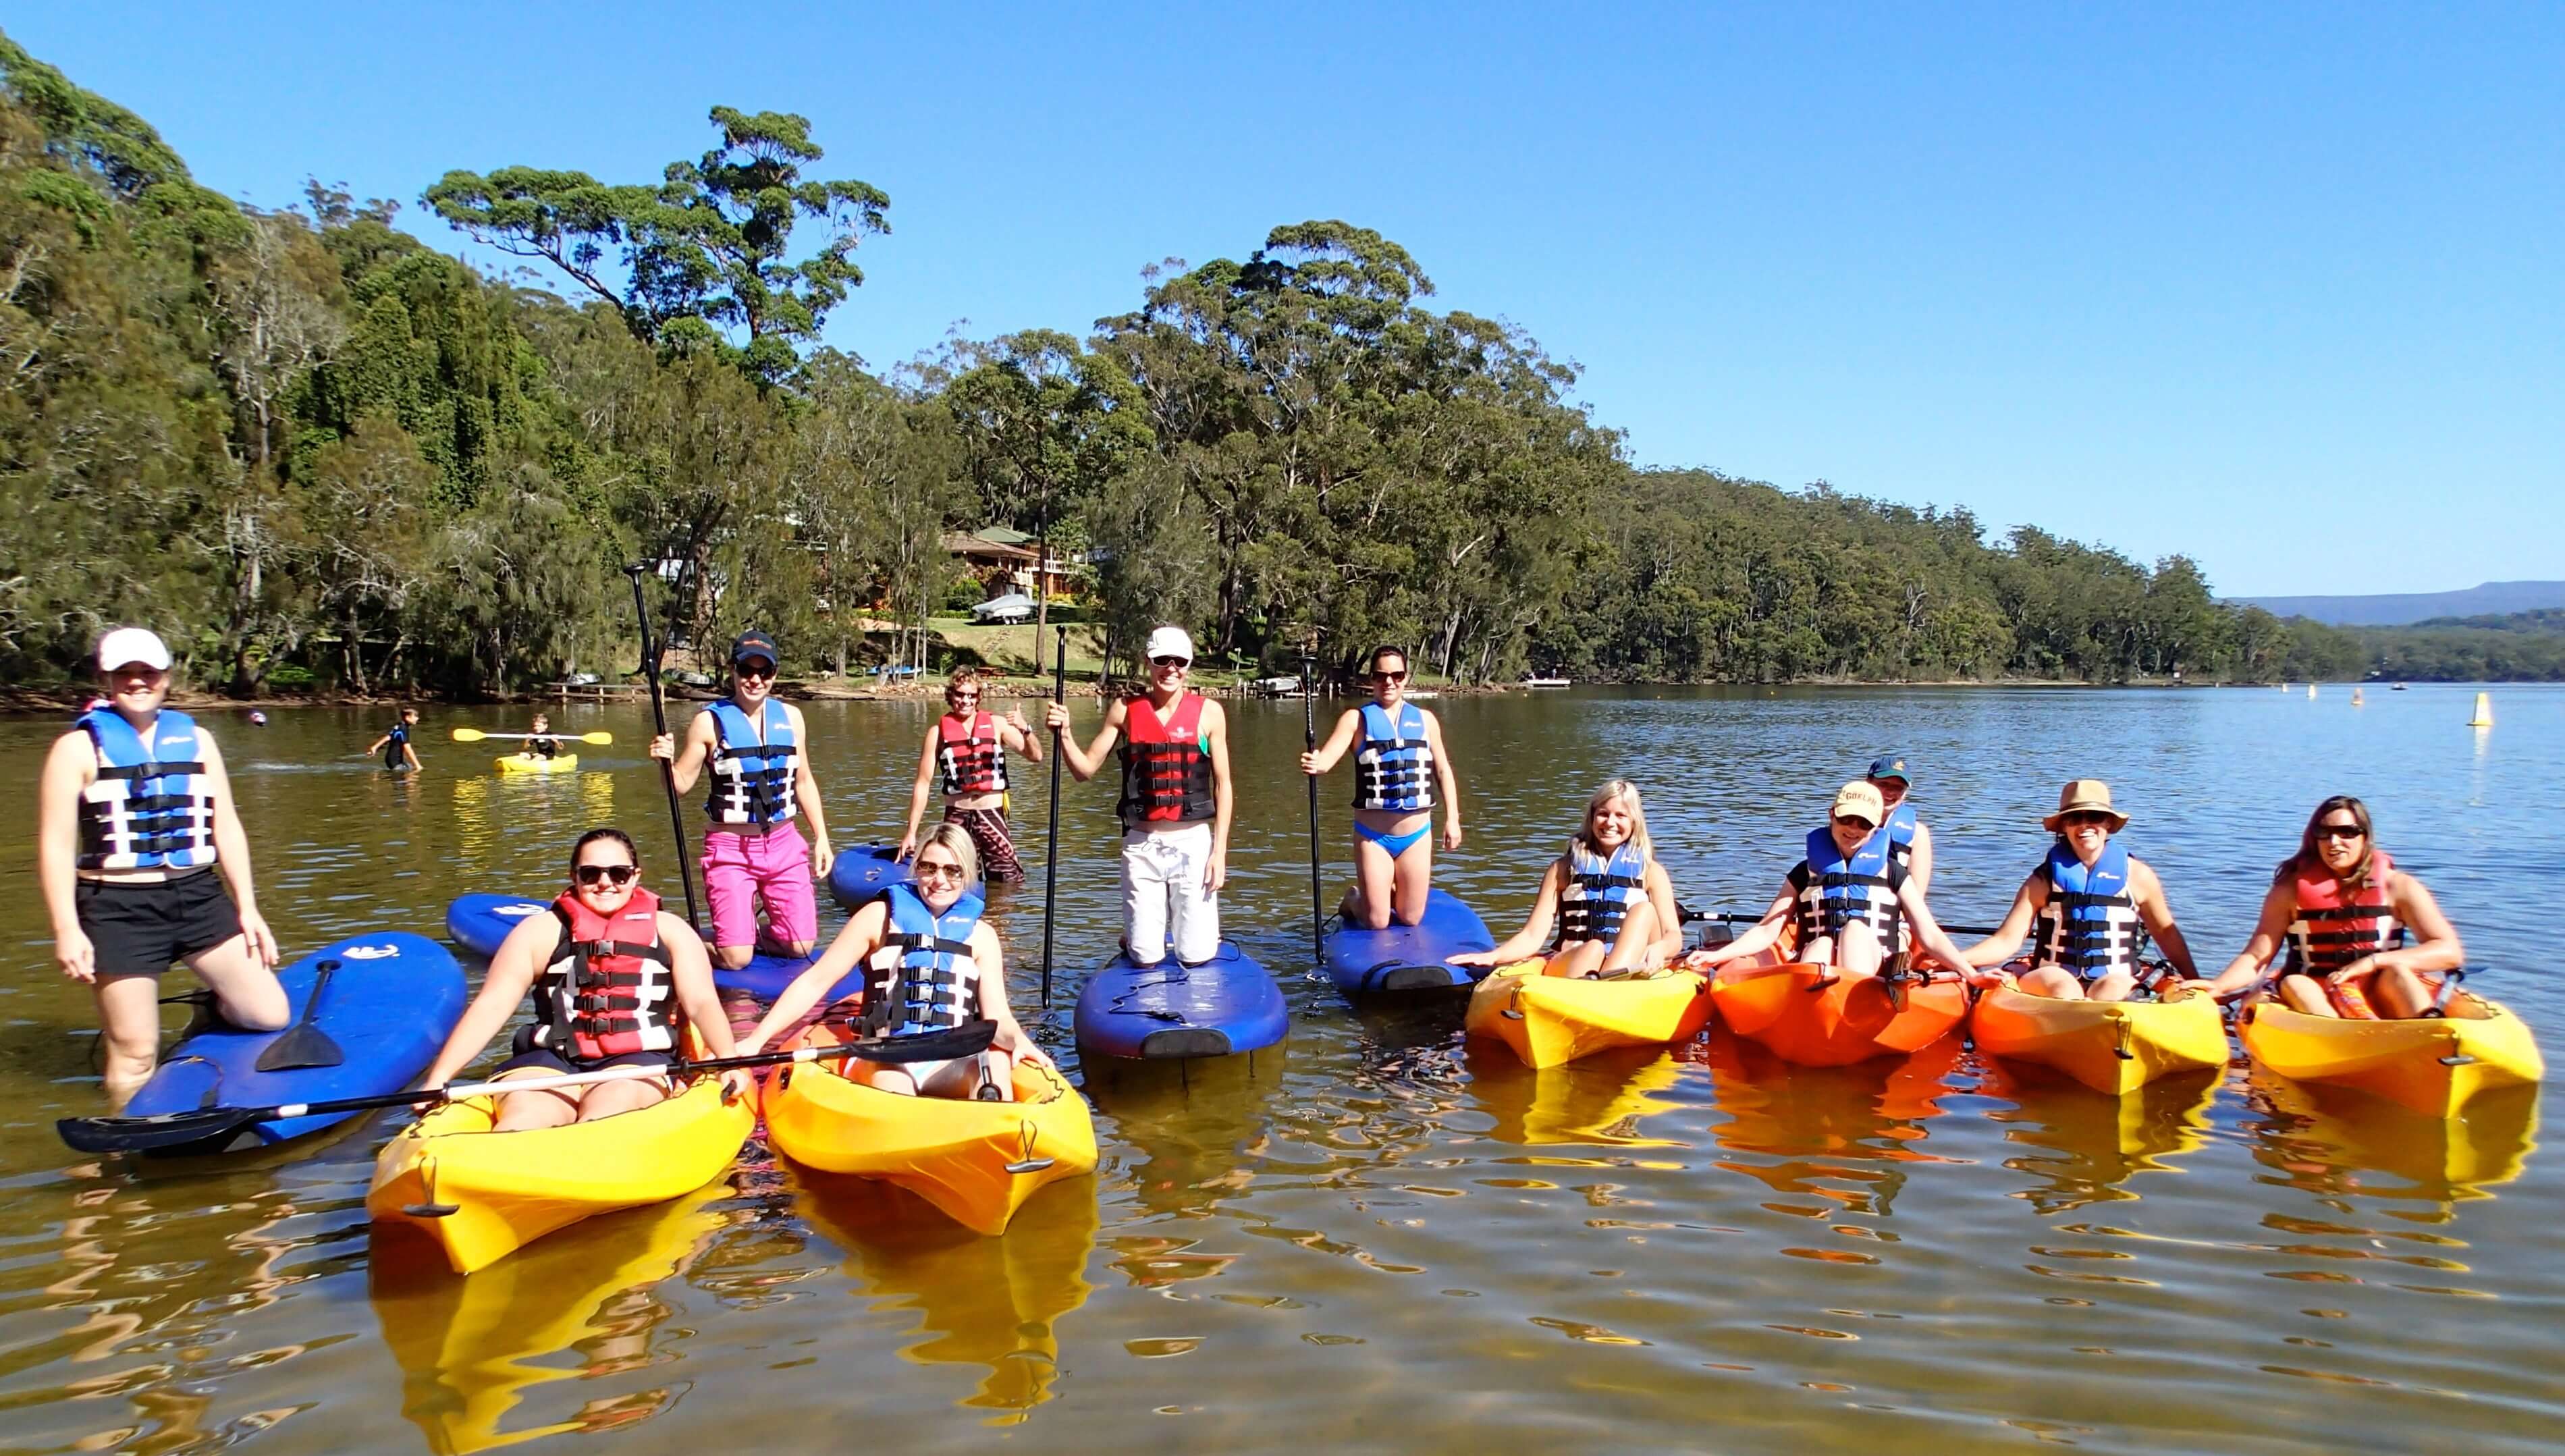 People with life jackets on seated in yellow kayaks and kneeling on paddle boards in a row on the water with bush in the background